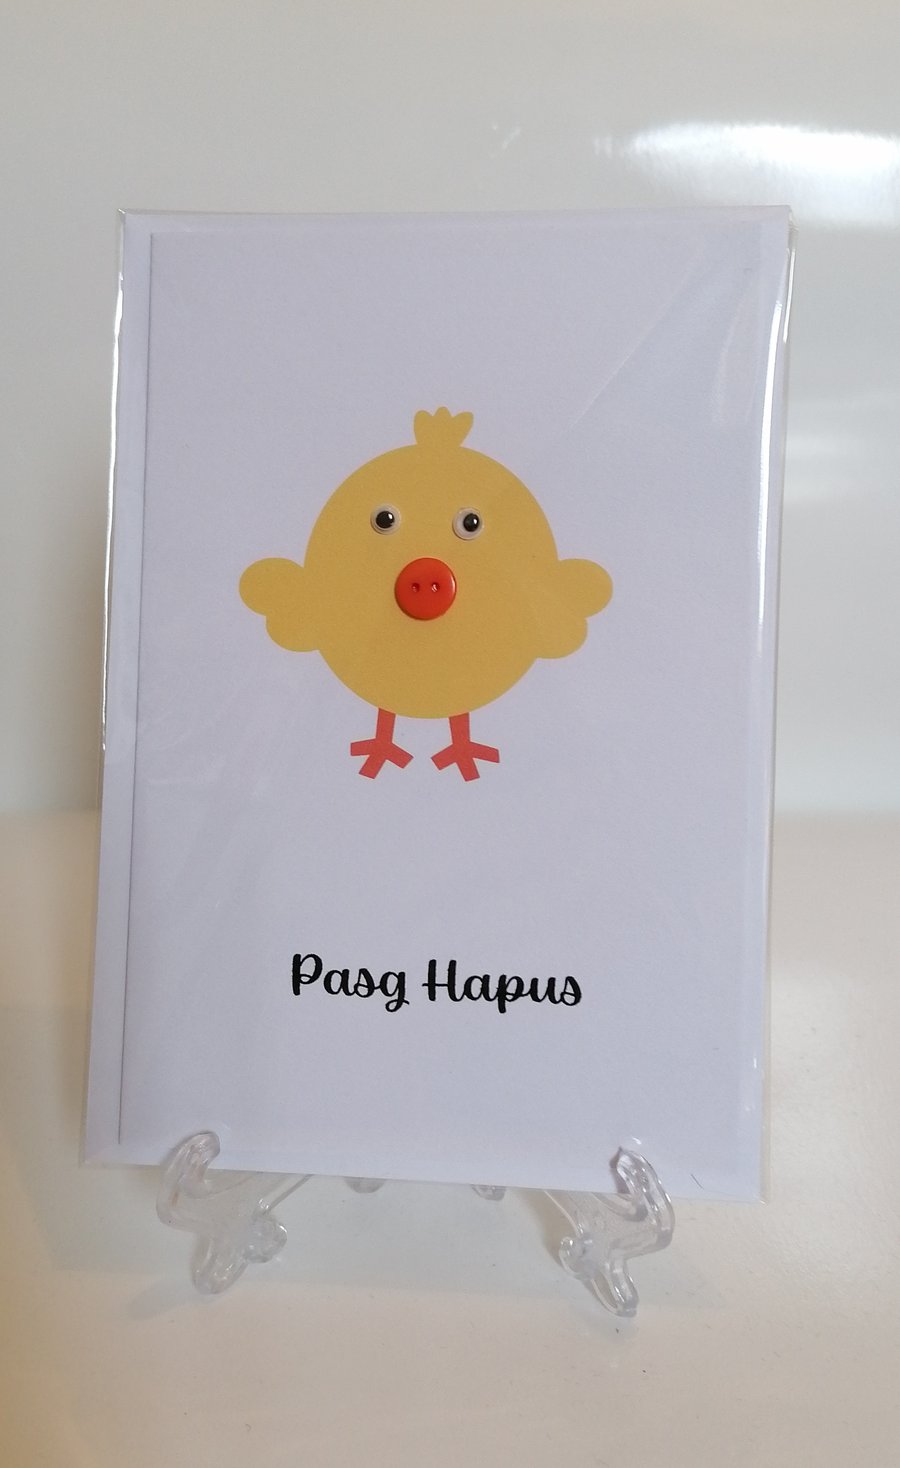 Pasg Hapus Happy Easter chick with a button nose greetings card 